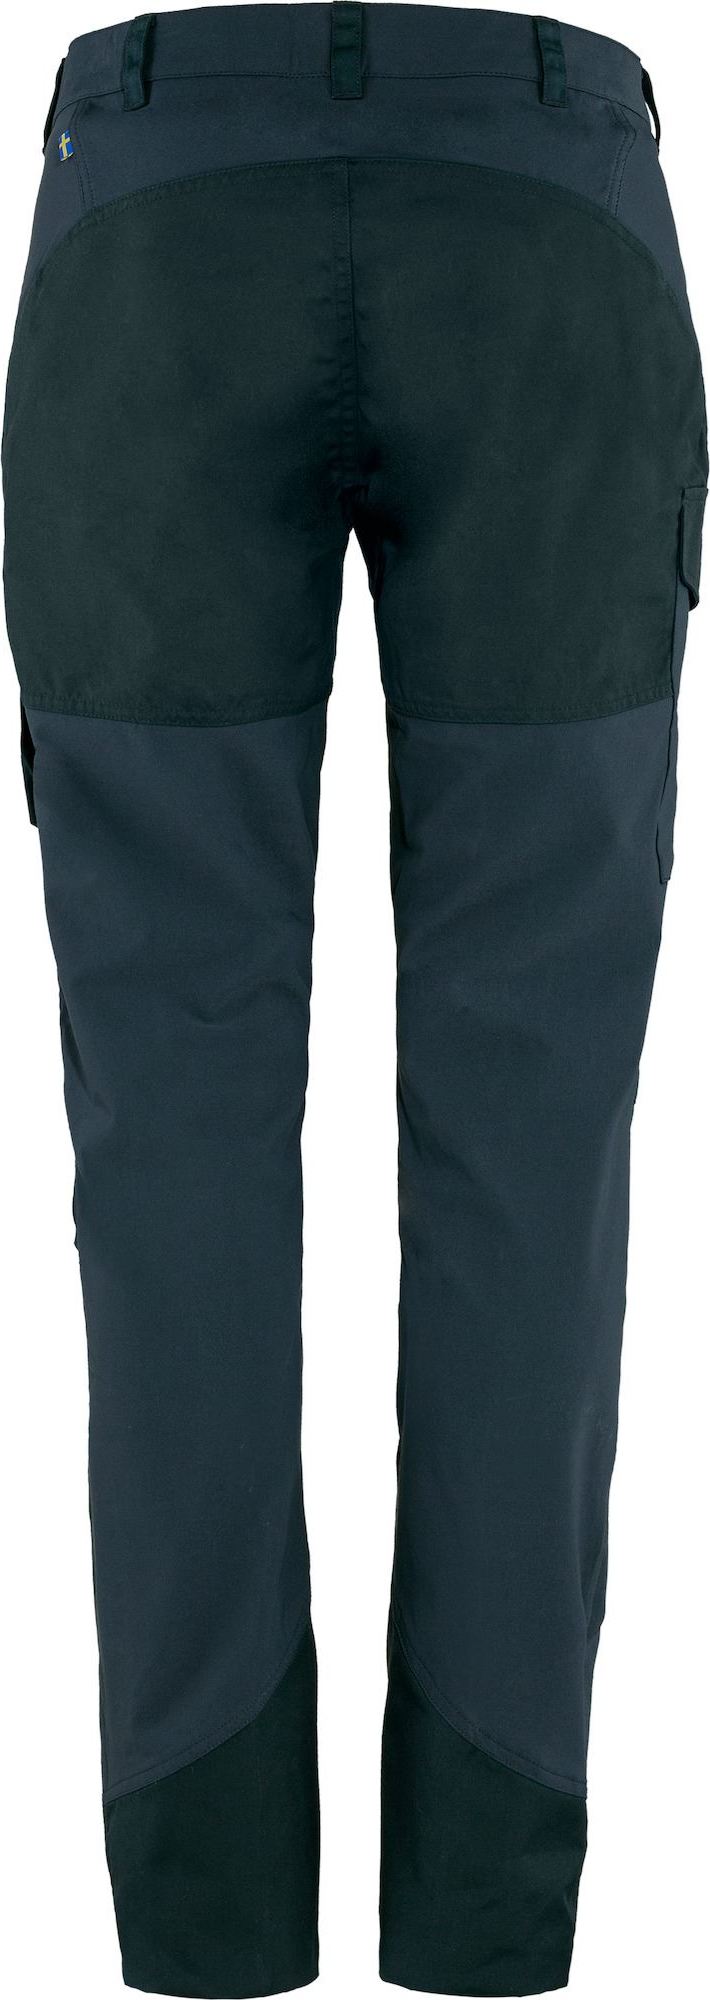 Buy Women's Nikka Trousers Curved Dark Navy here | Outnorth